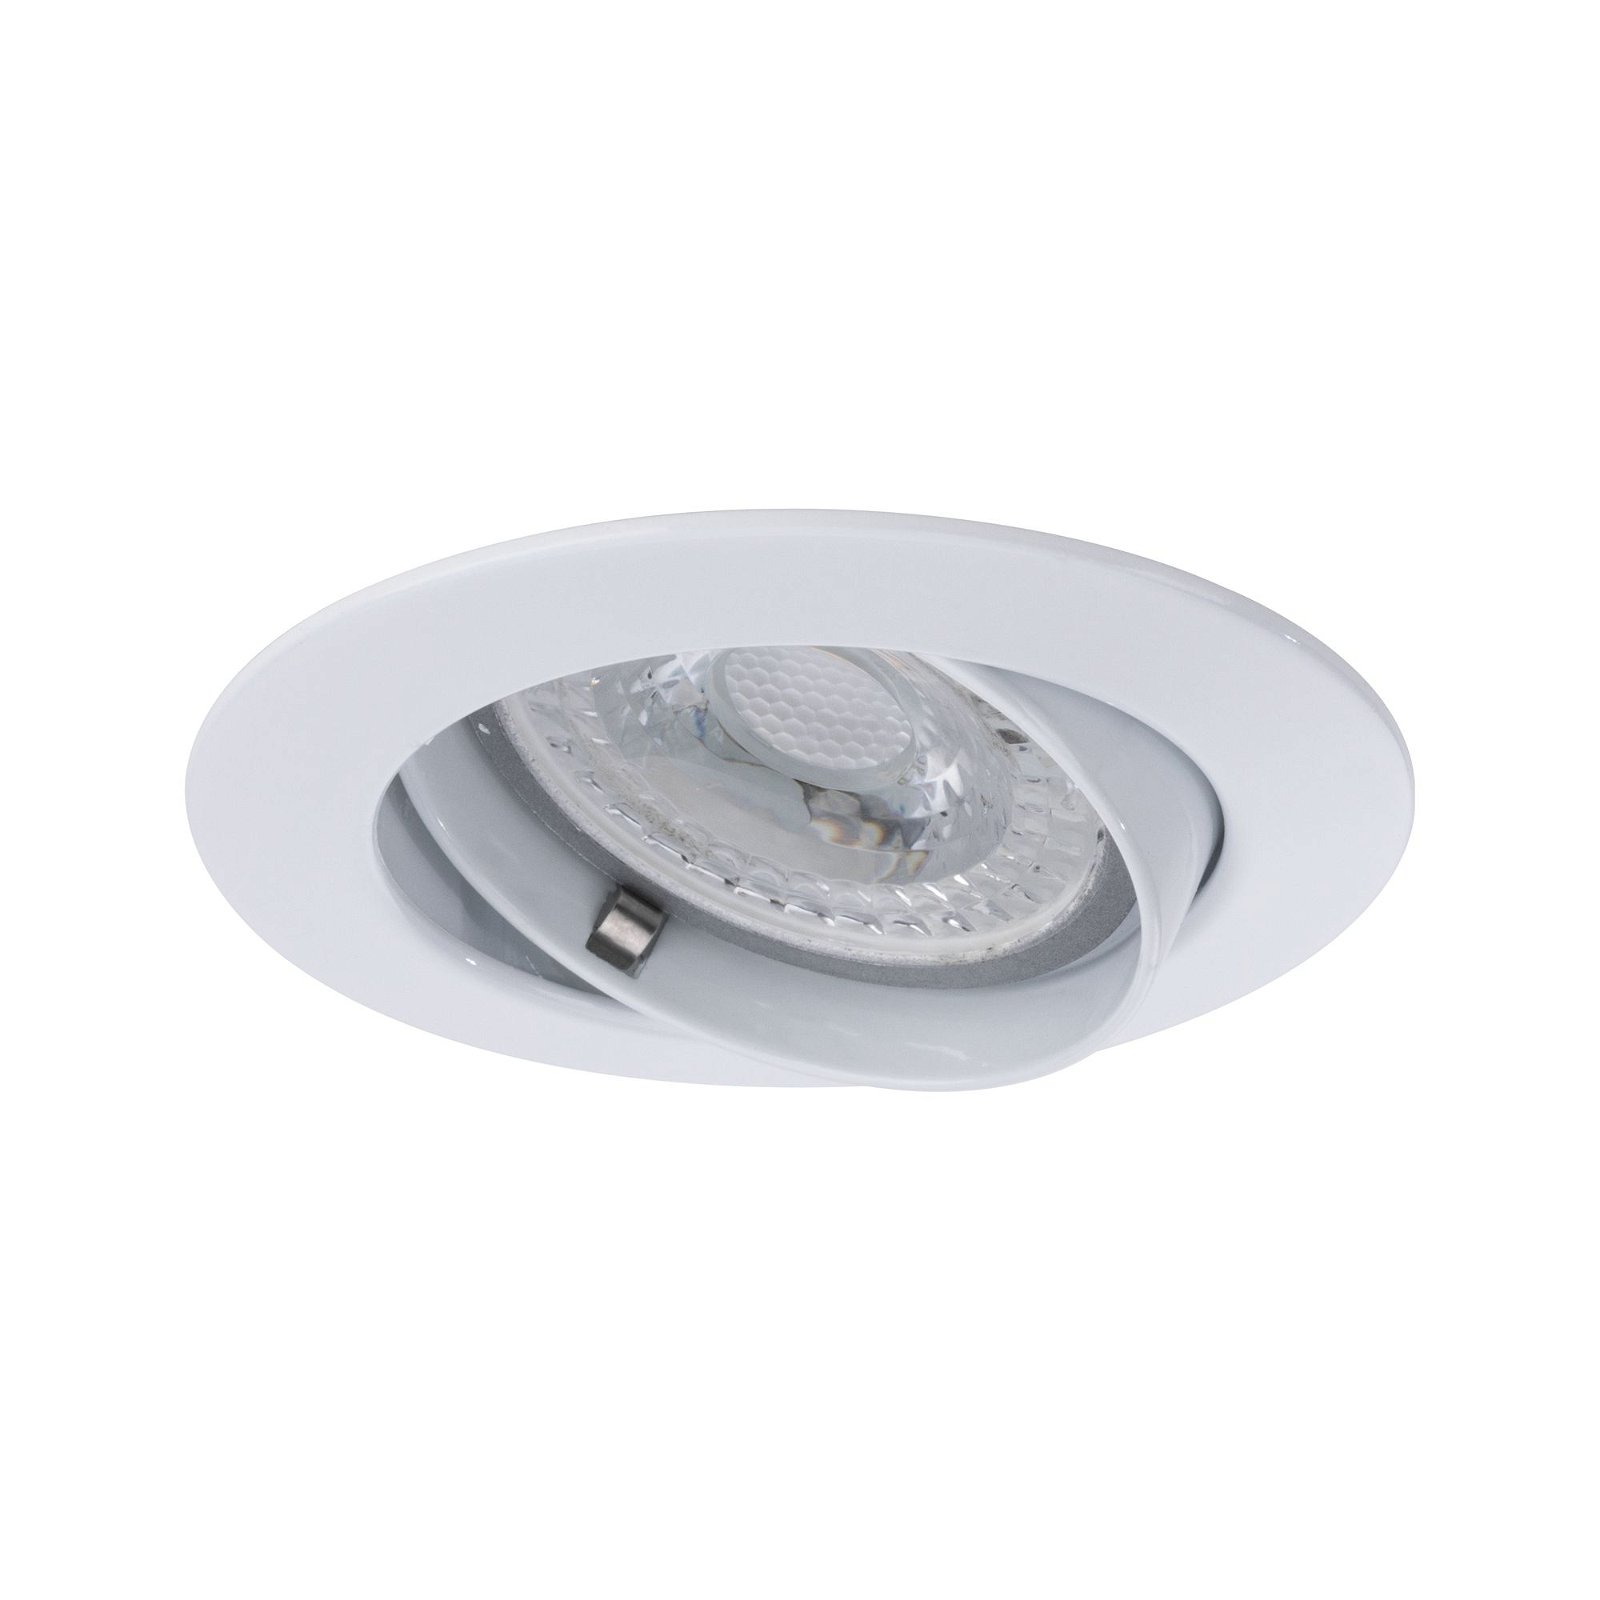 Premium Recessed luminaire easyClick2 round 83mm 30° GU10 max. 50W 230V dimmable White